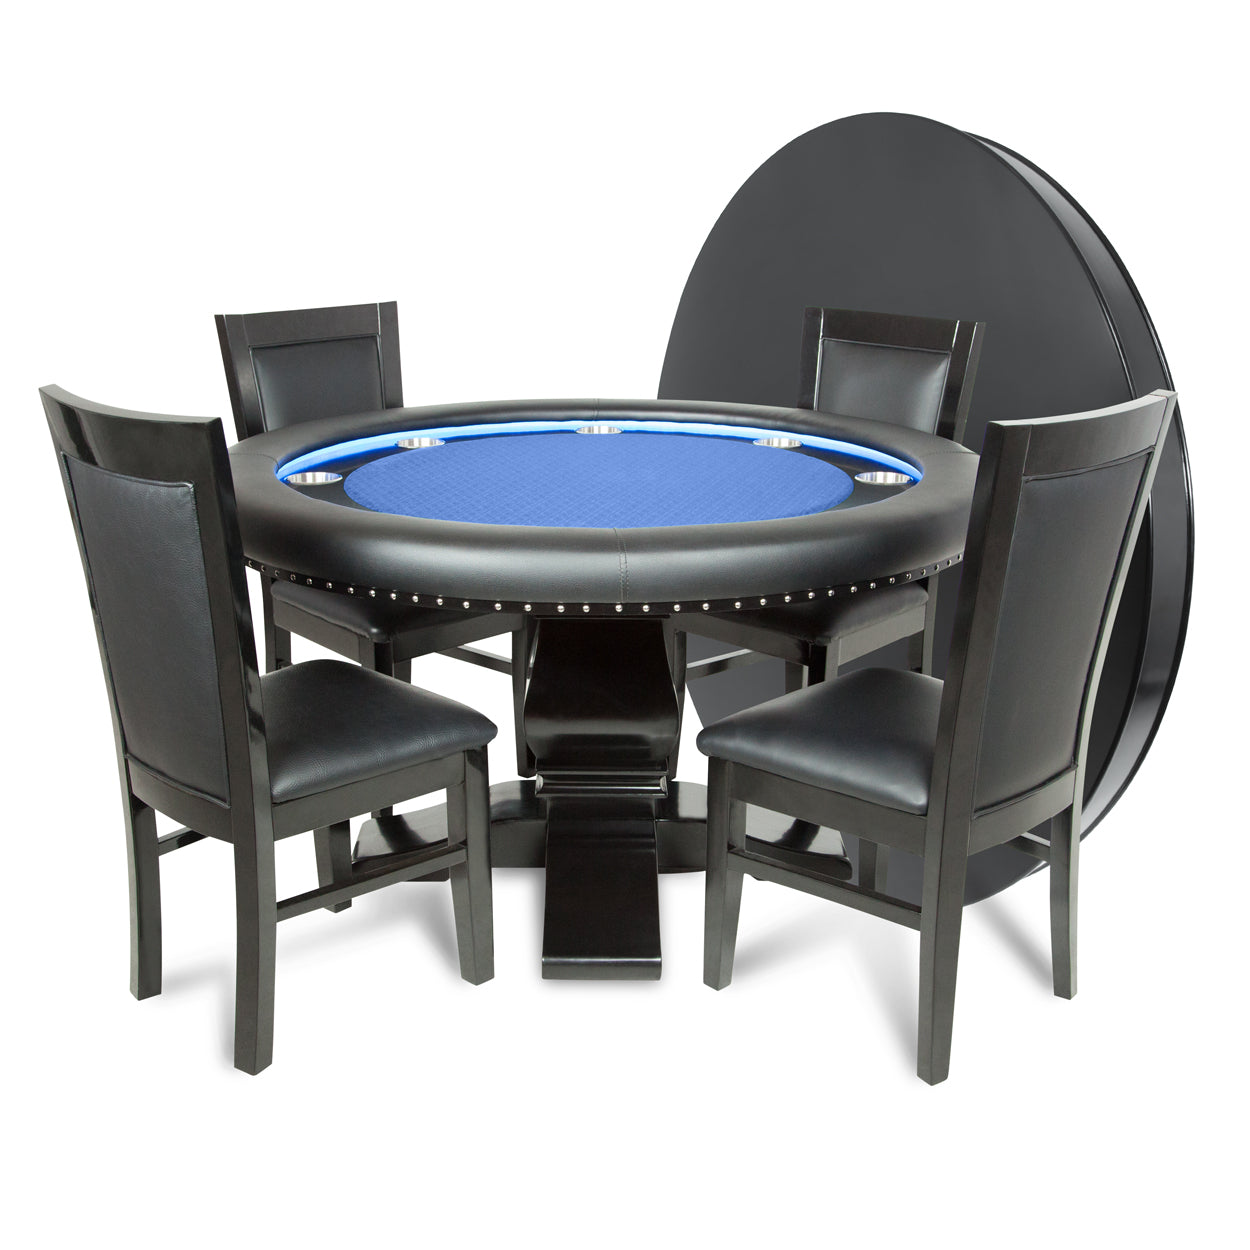 BBO The Ginza LED Poker Table Blue Speed Cloth Dining set